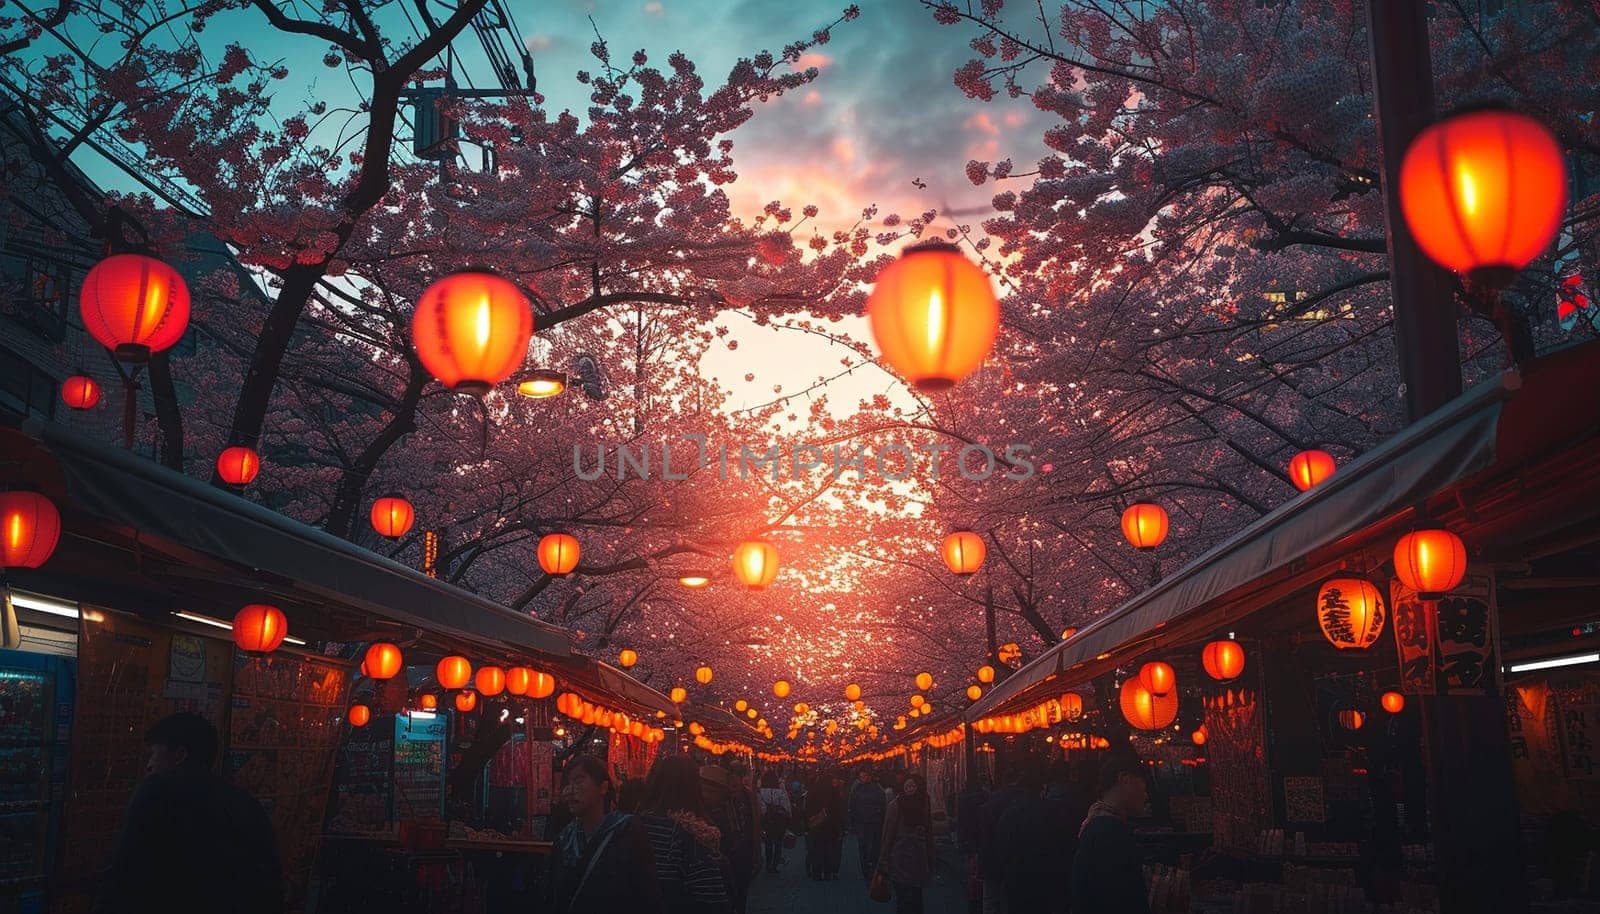 A colorful street photo of the streets of Japan during the Hanami holiday. Cherry blossoms by NeuroSky